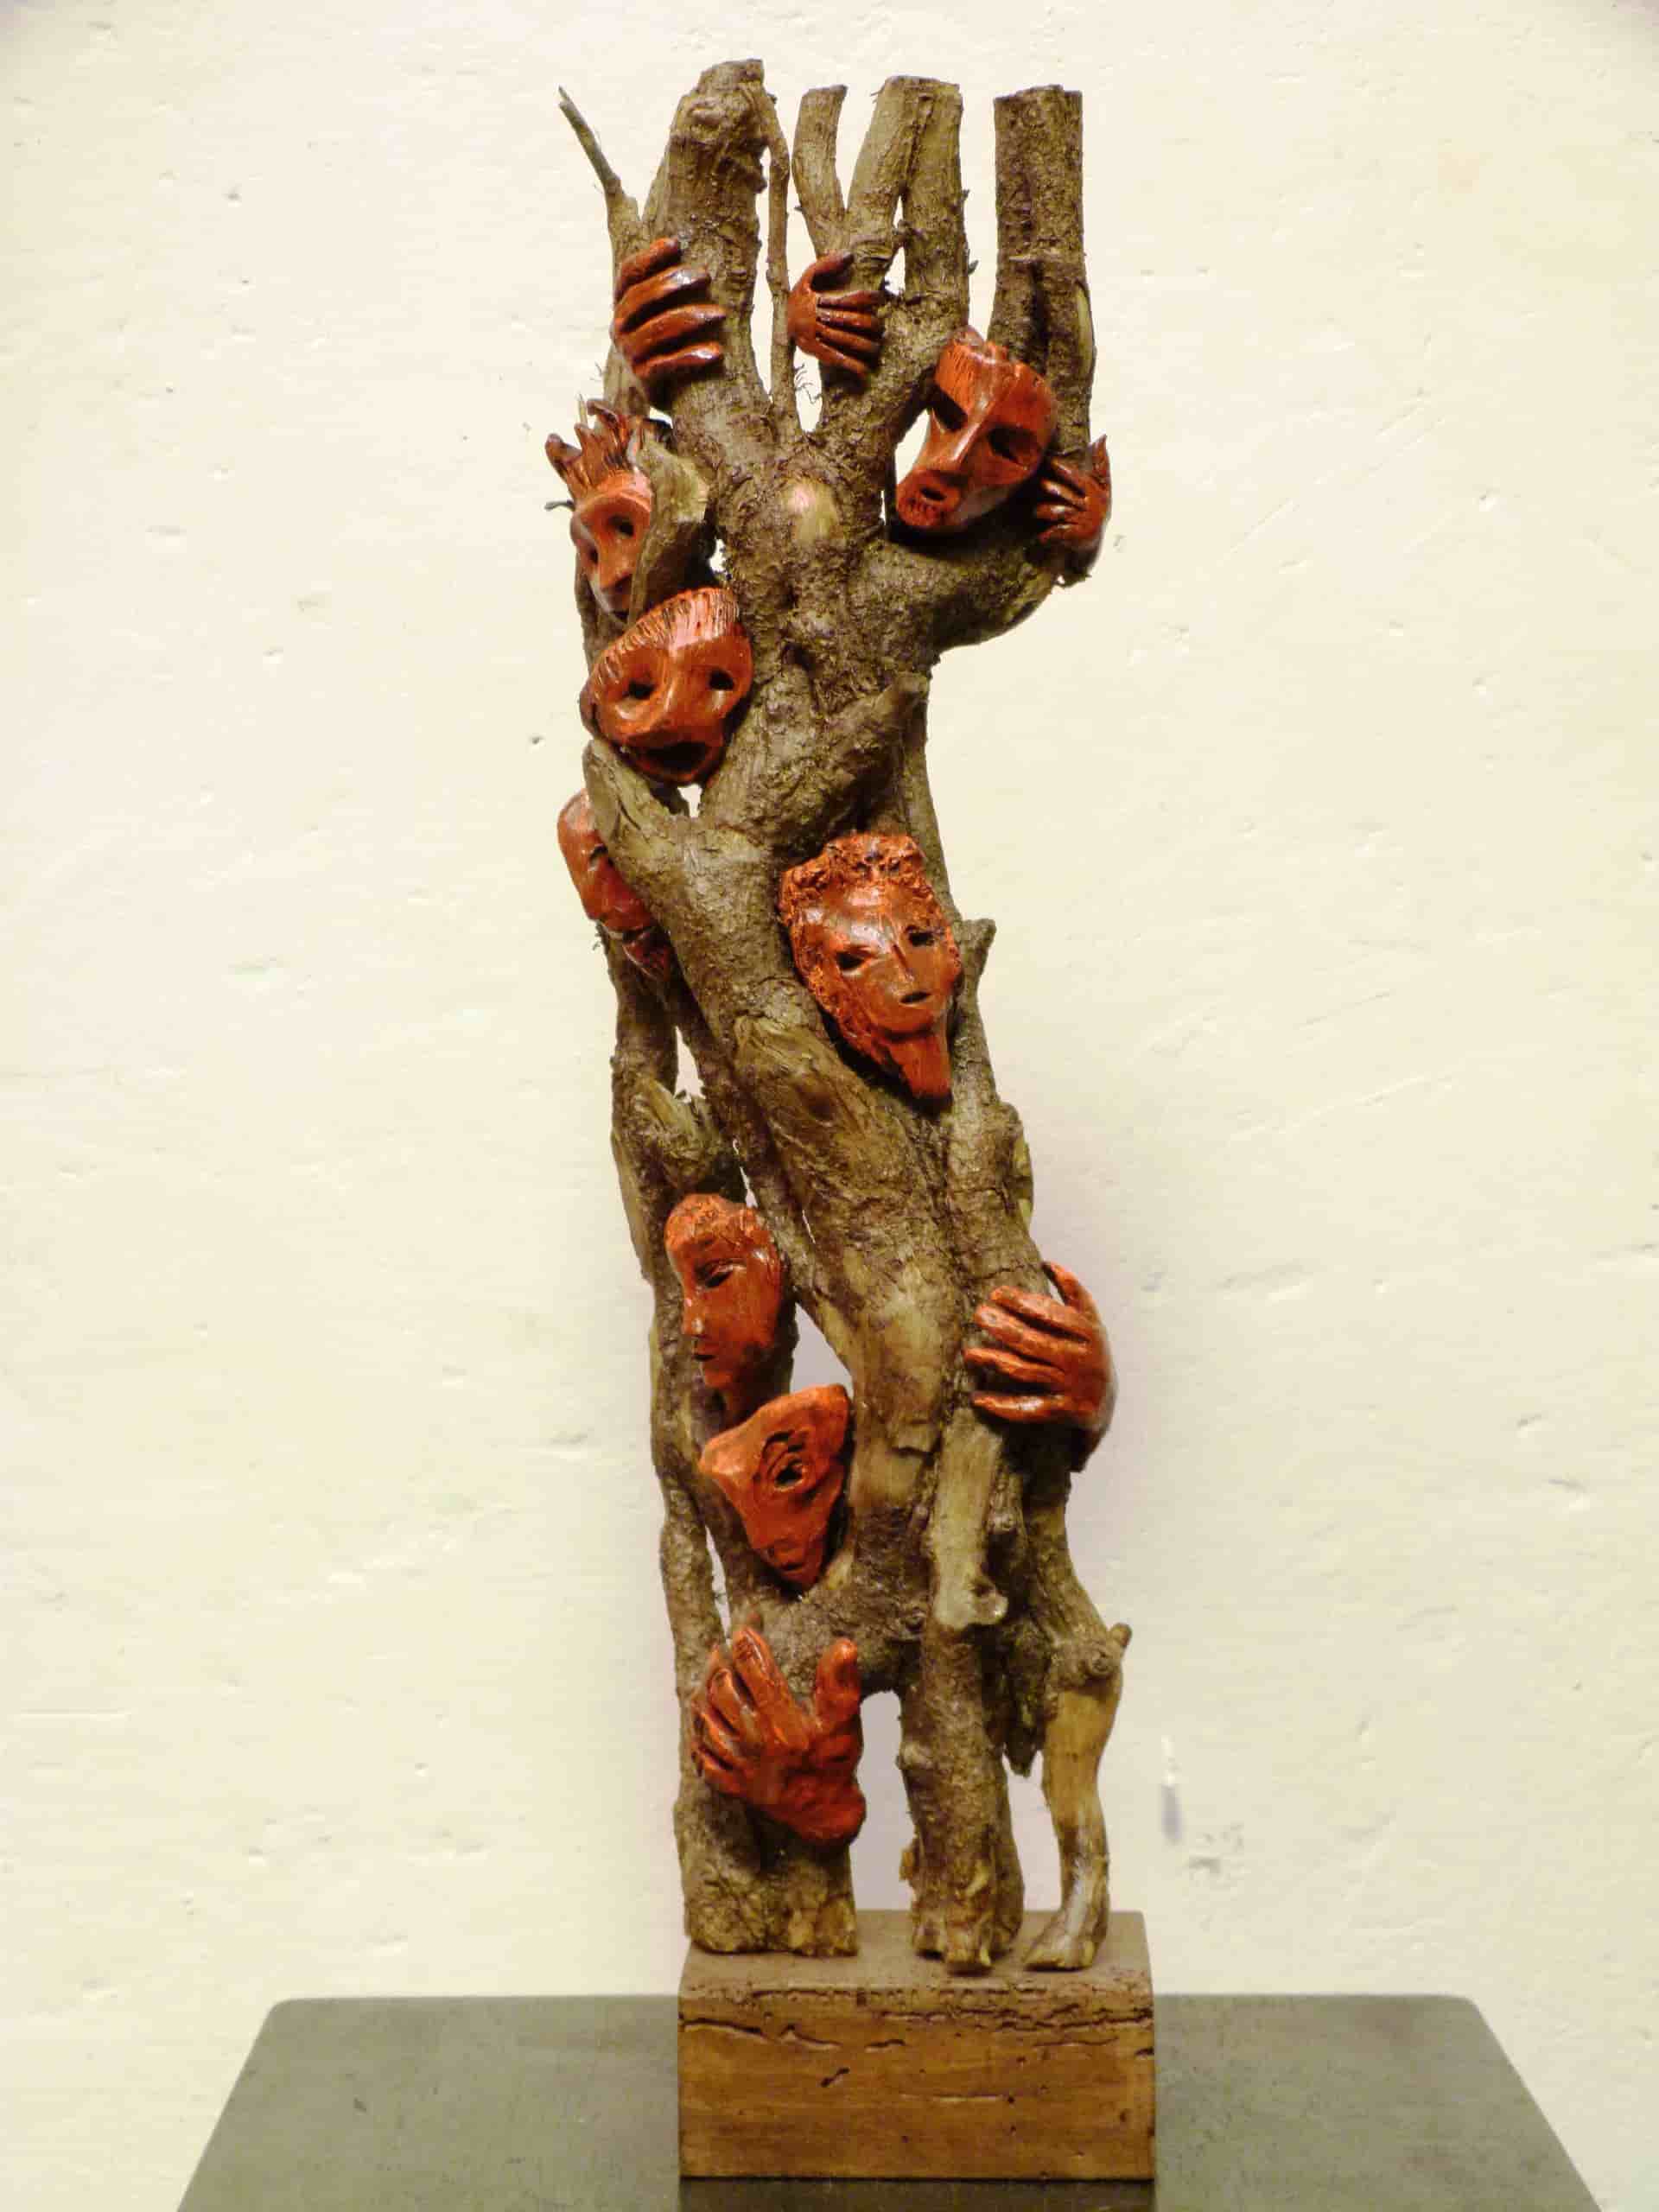 Oppression rouge sculptures polychromes